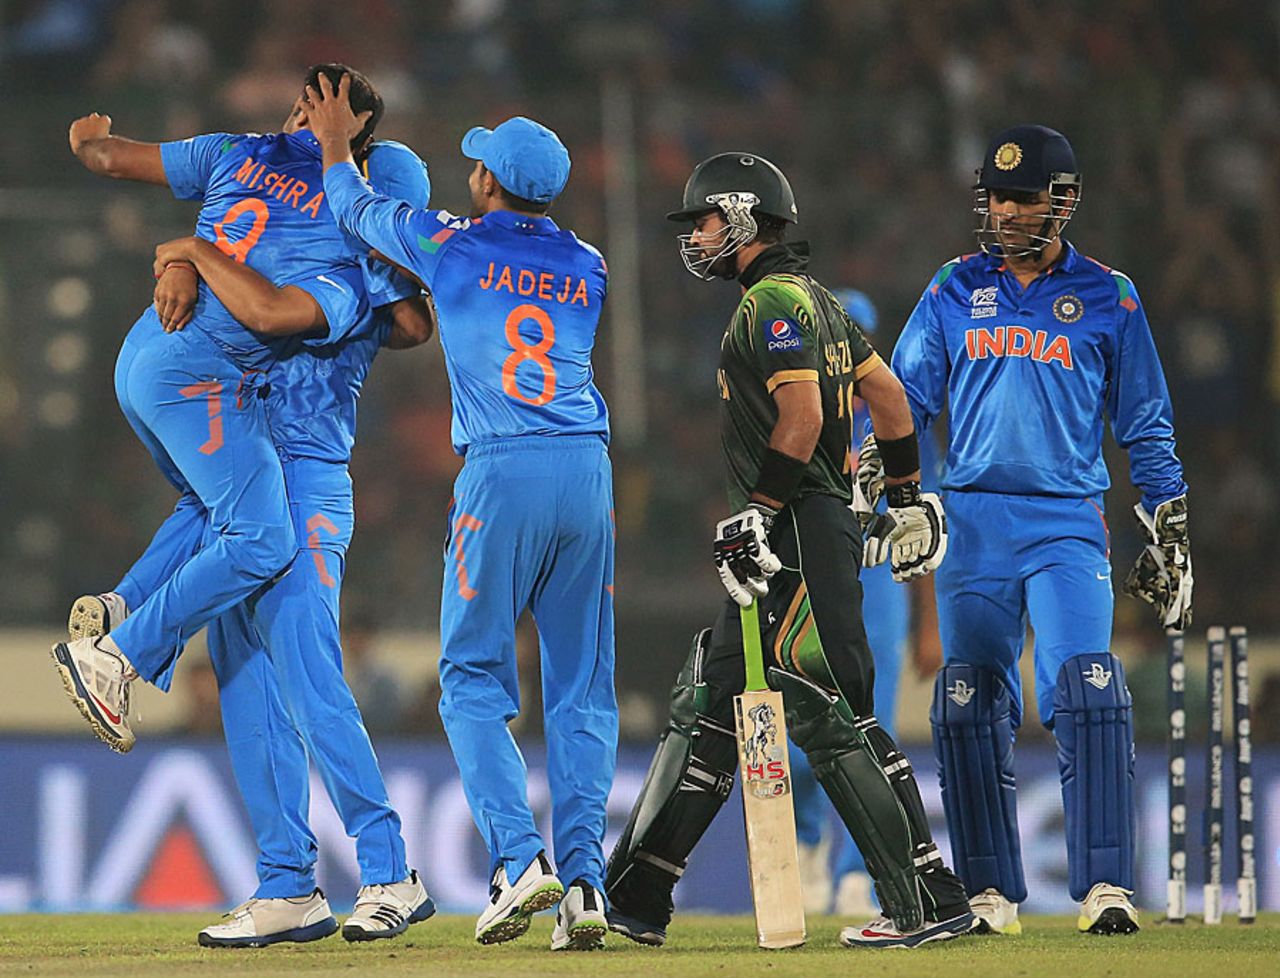 Amit Mishra is the center of attention after getting Ahmed Shehzad stumped, India v Pakistan, Group 2, Mirpur, March 21, 2014 